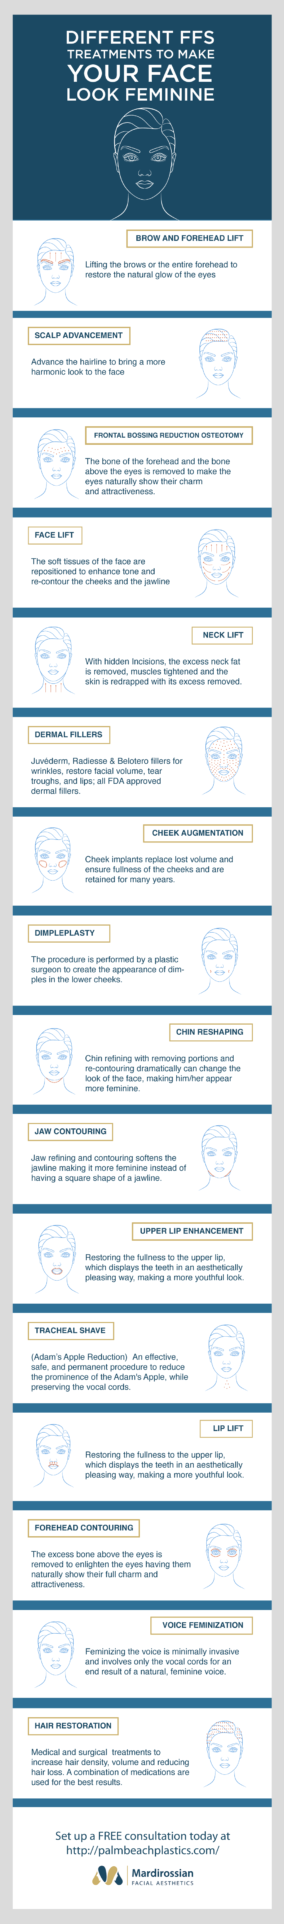 Different FFS Treatments To Make Your Face Look Feminine